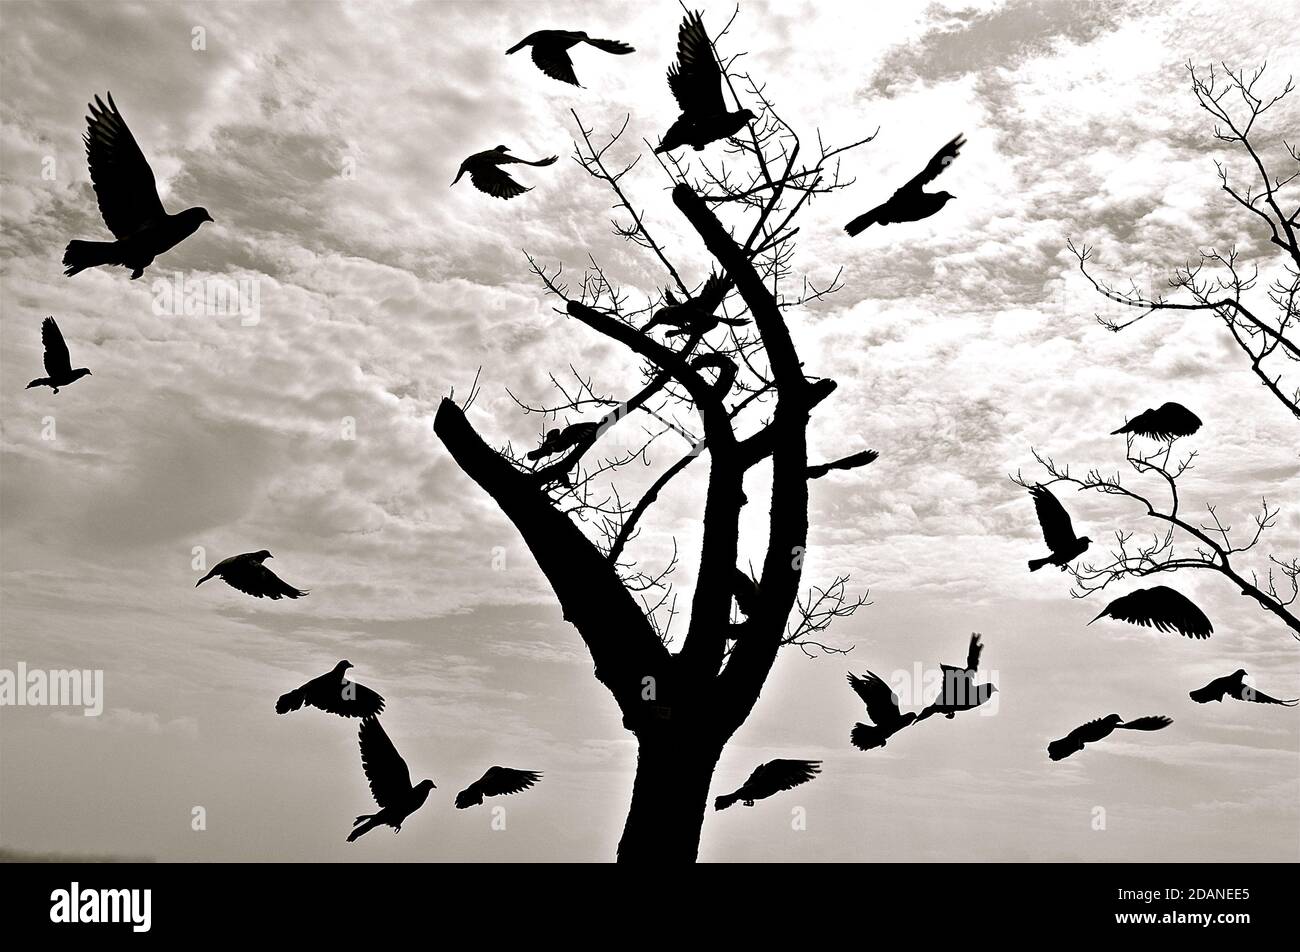 Black and white image of the silhouette of a flock of pigeons flying around a skeleton tree stump against a cloudy sky background. Stock Photo